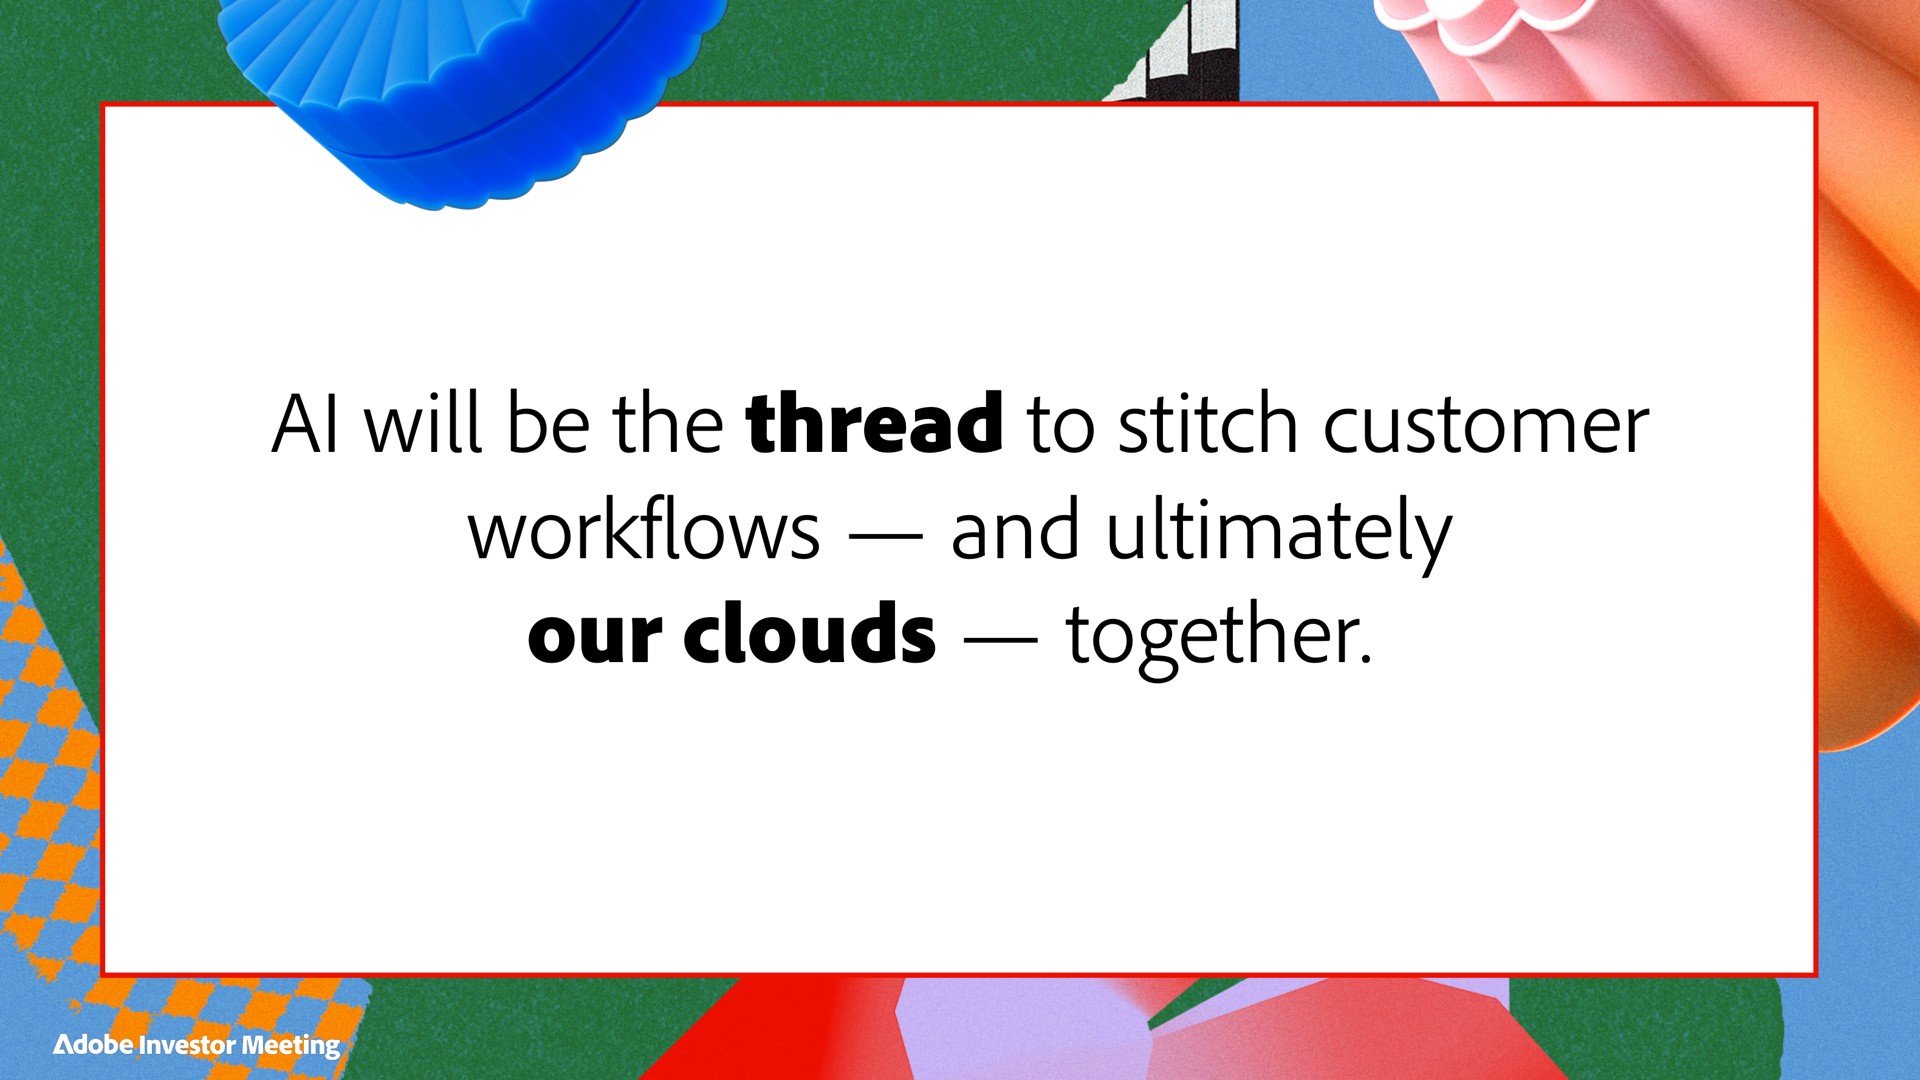 will be the thread to stitch customer and ultimately our clouds together adobe investor meeting | Adobe